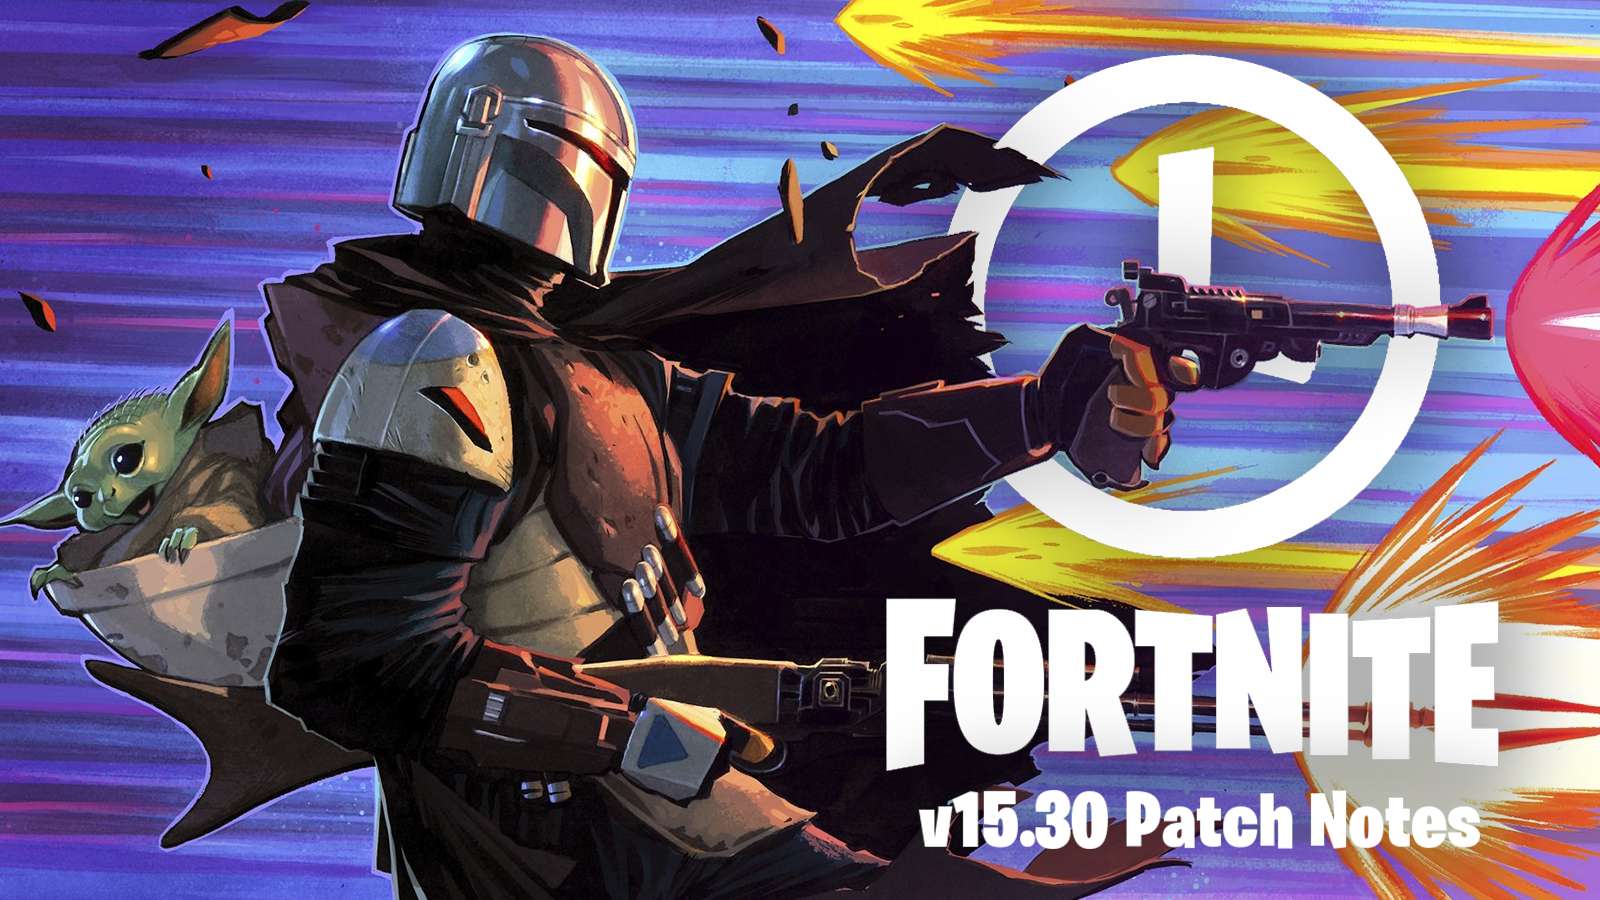 The Mandalorian shoots past Fortnite patch 15.30 update with Baby Yoda on his back.